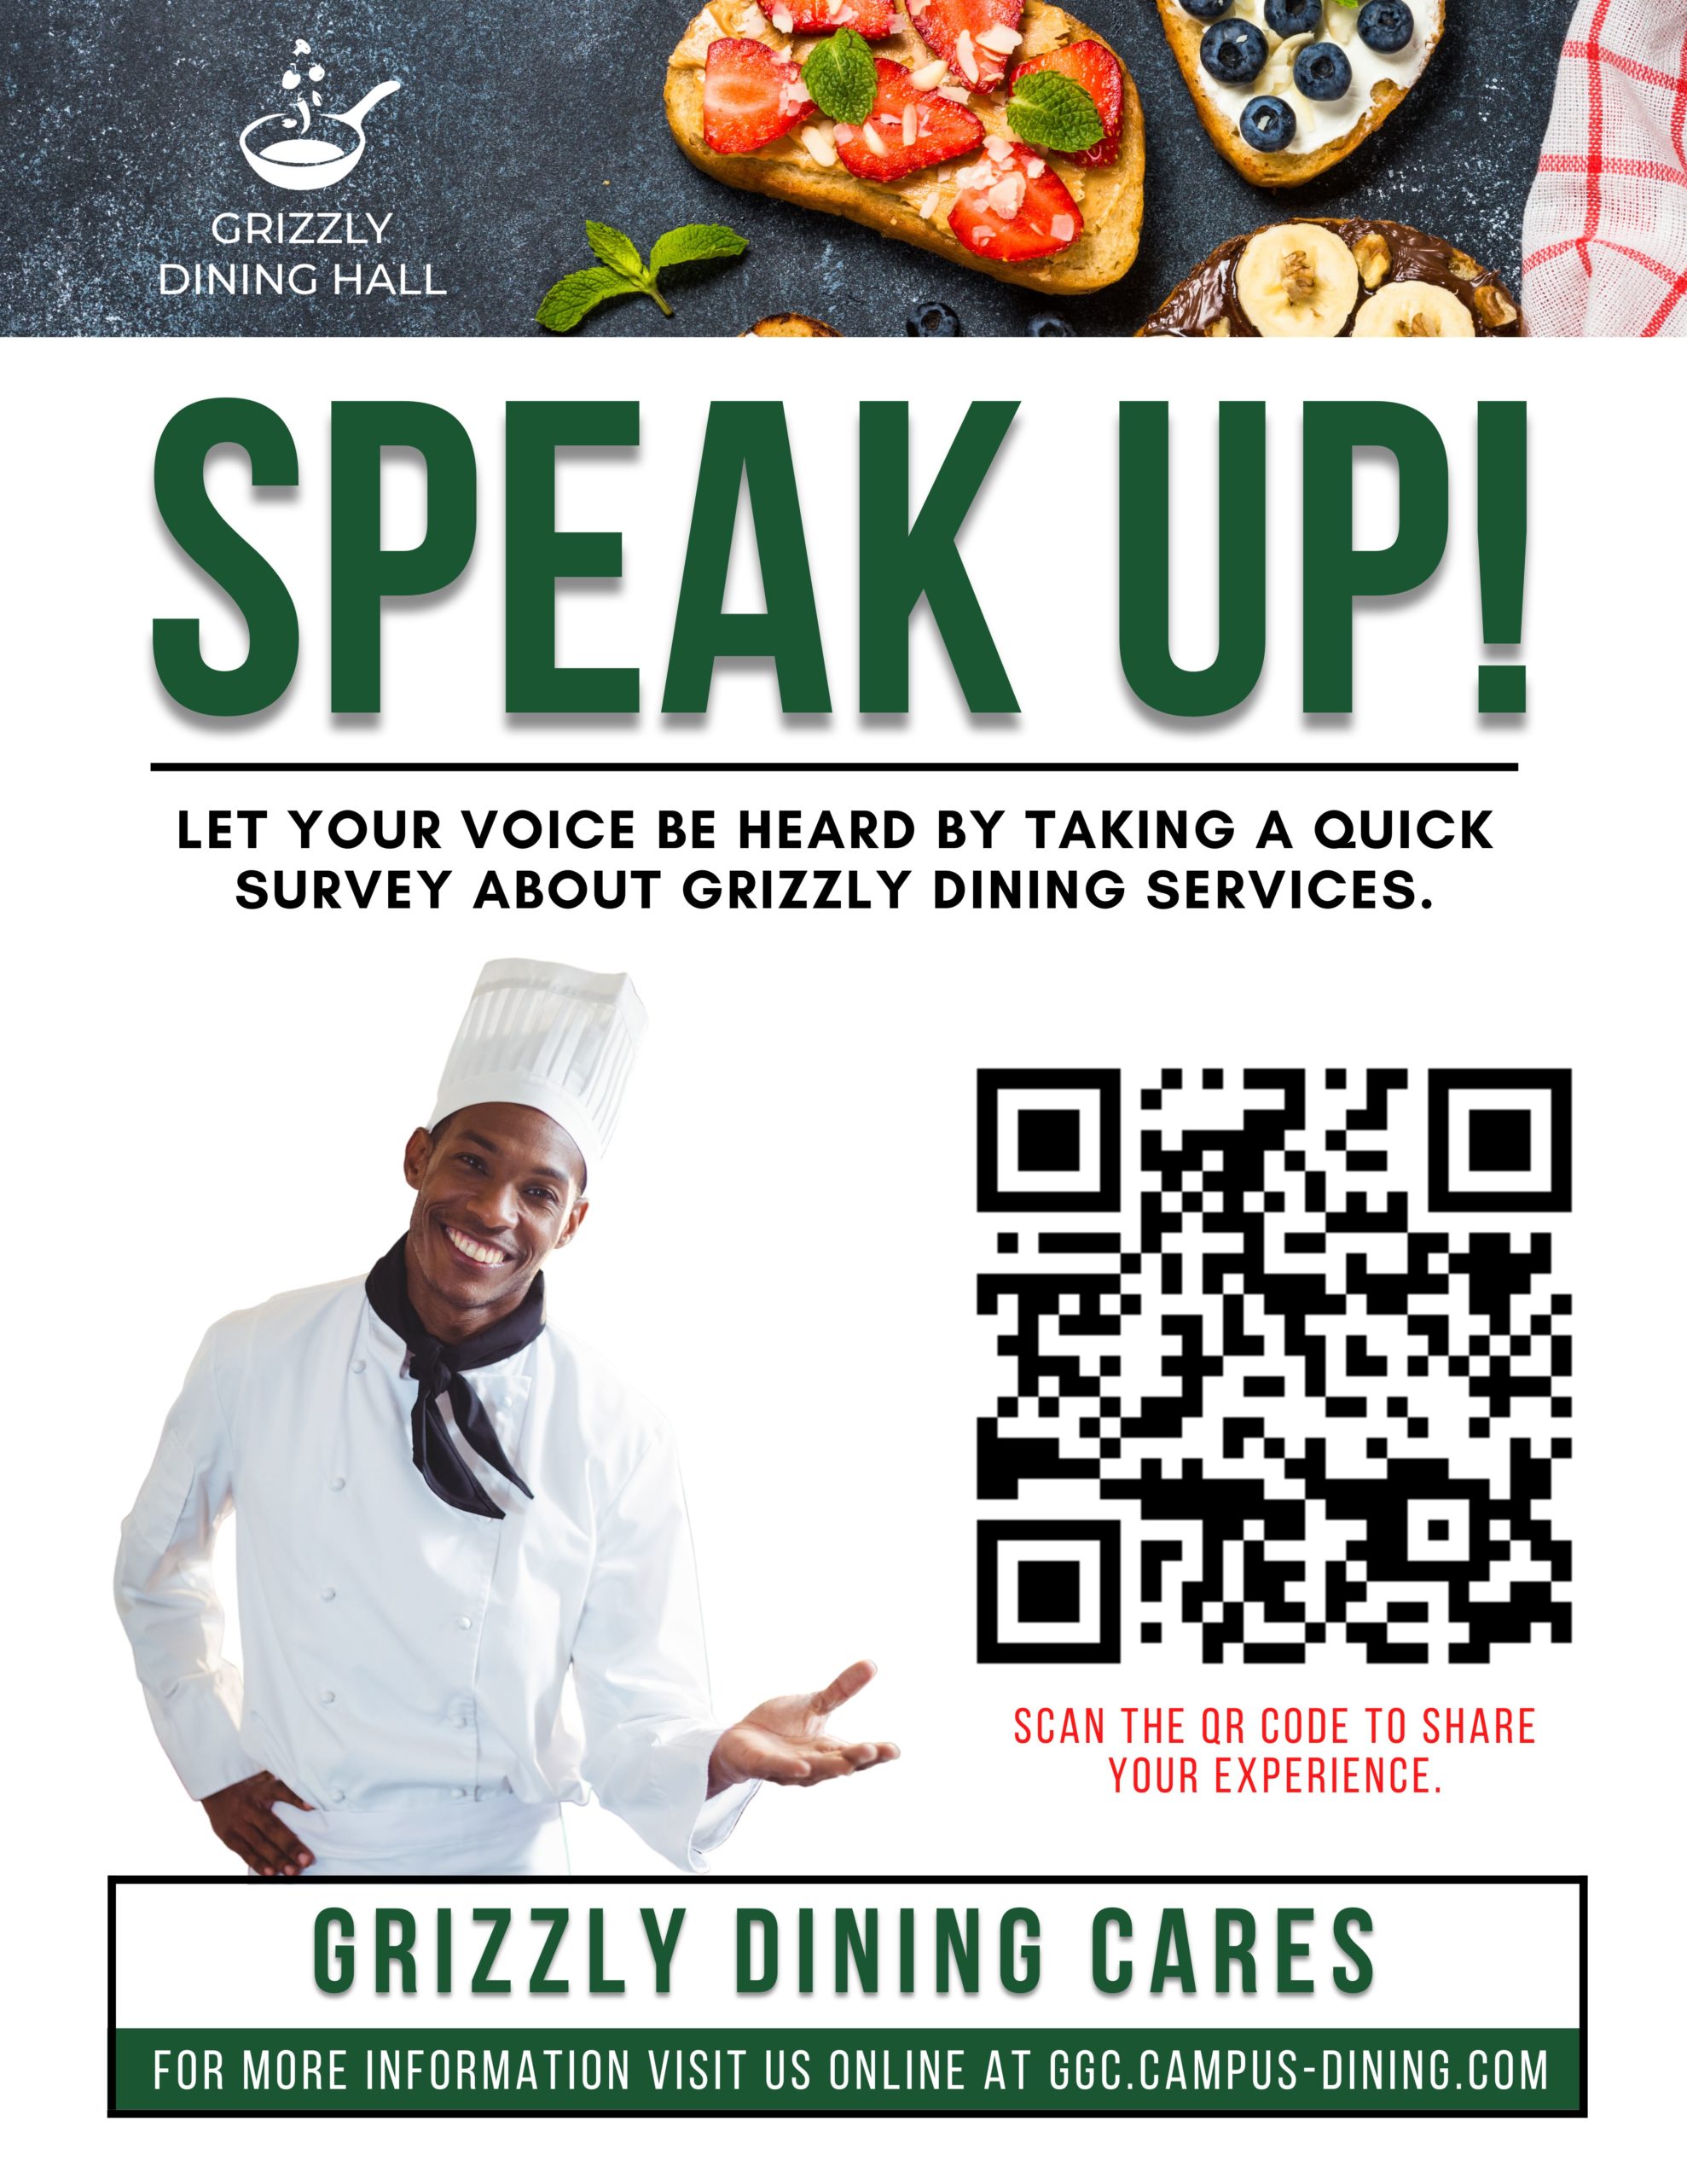 SPEAK UP about Grizzly Dining services.